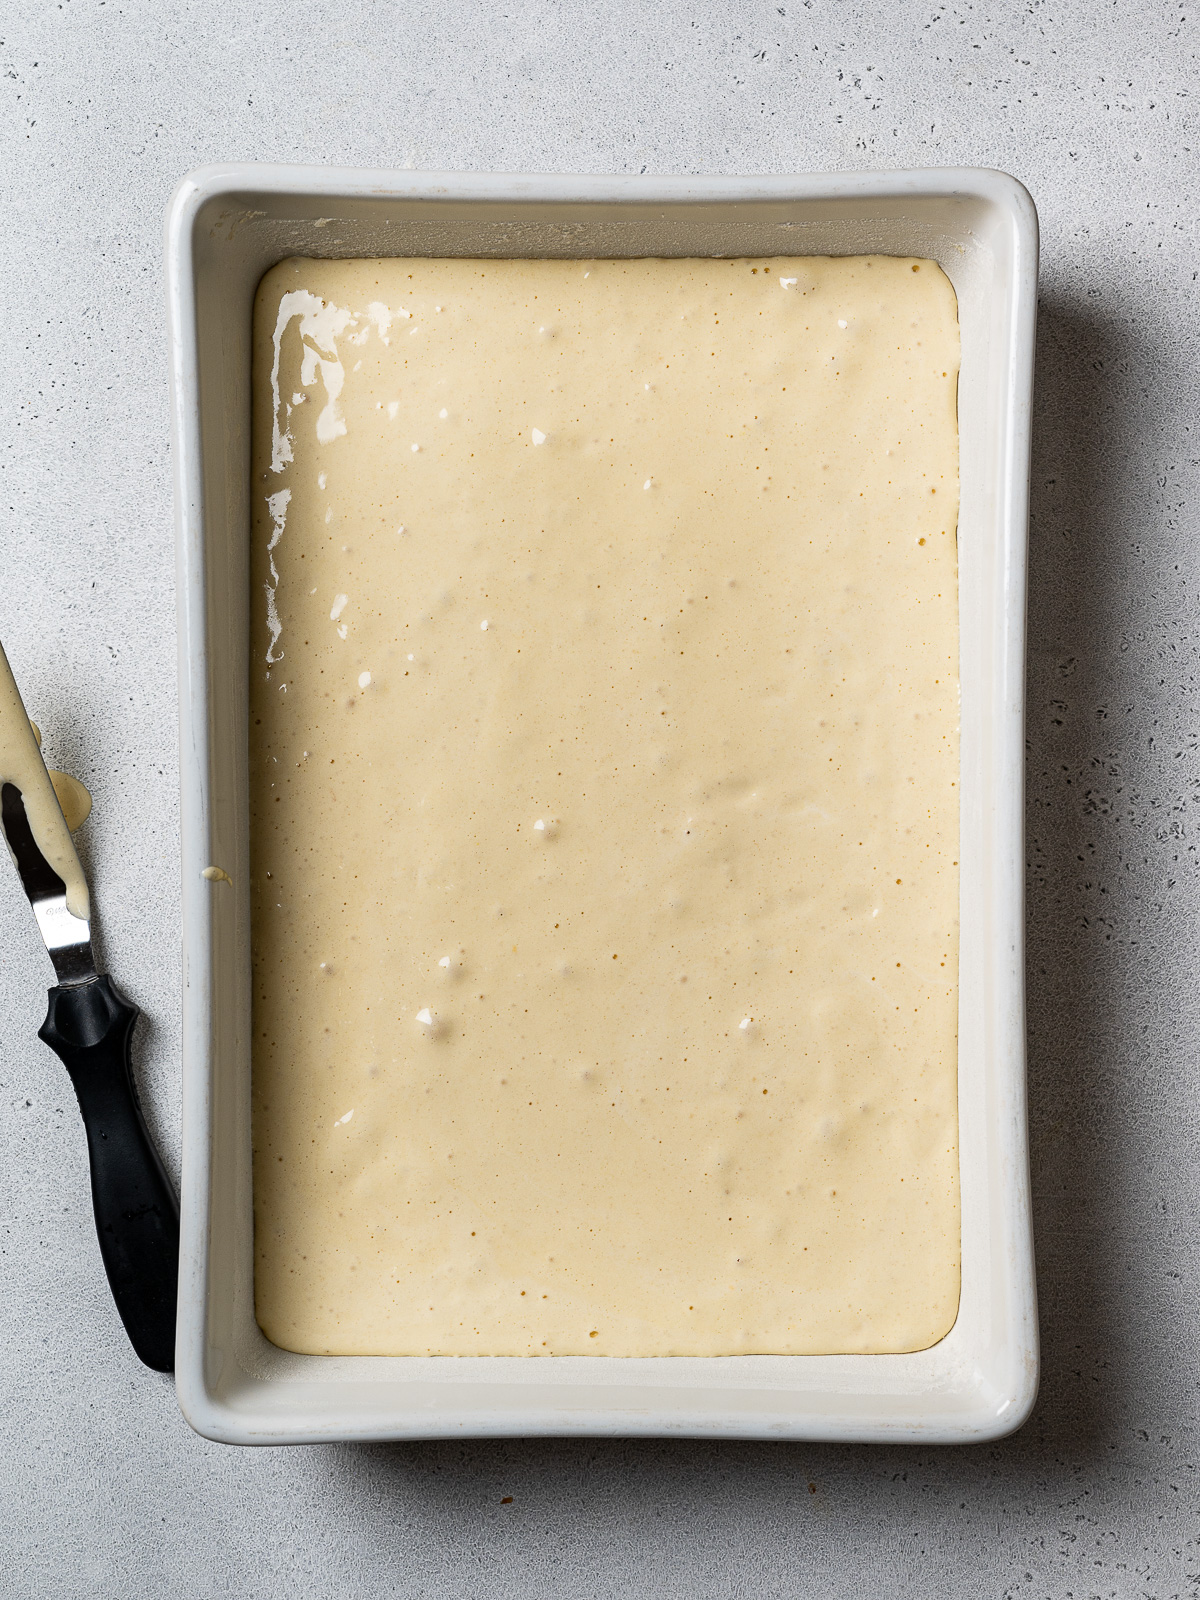 un-baked cake batter in baking dish